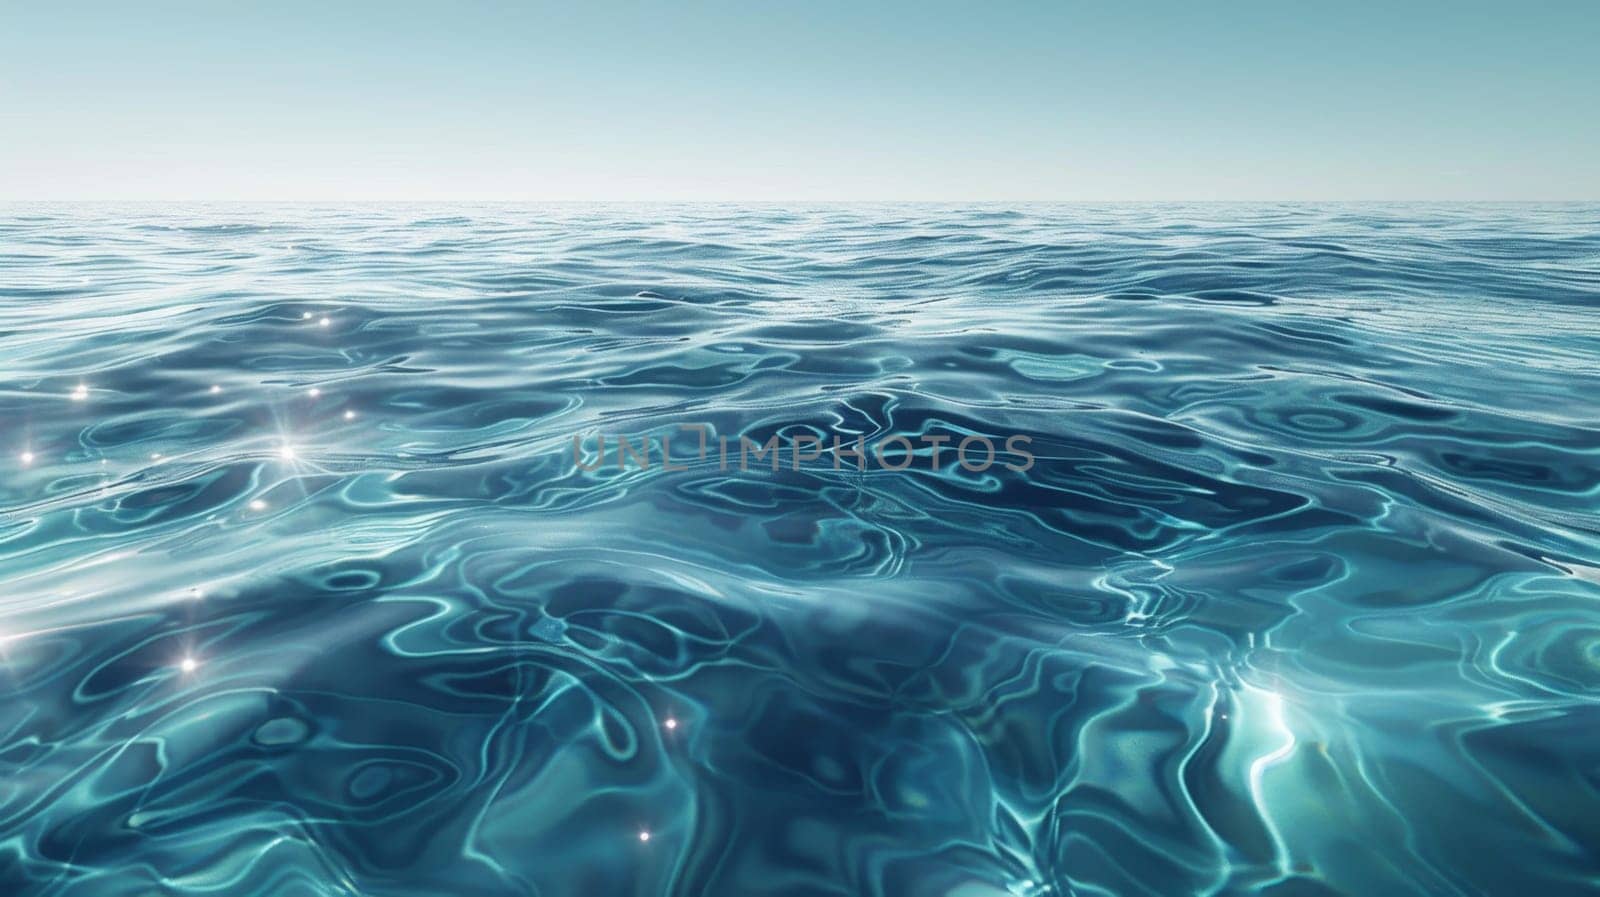 Textured background of transparent clear water by Lobachad